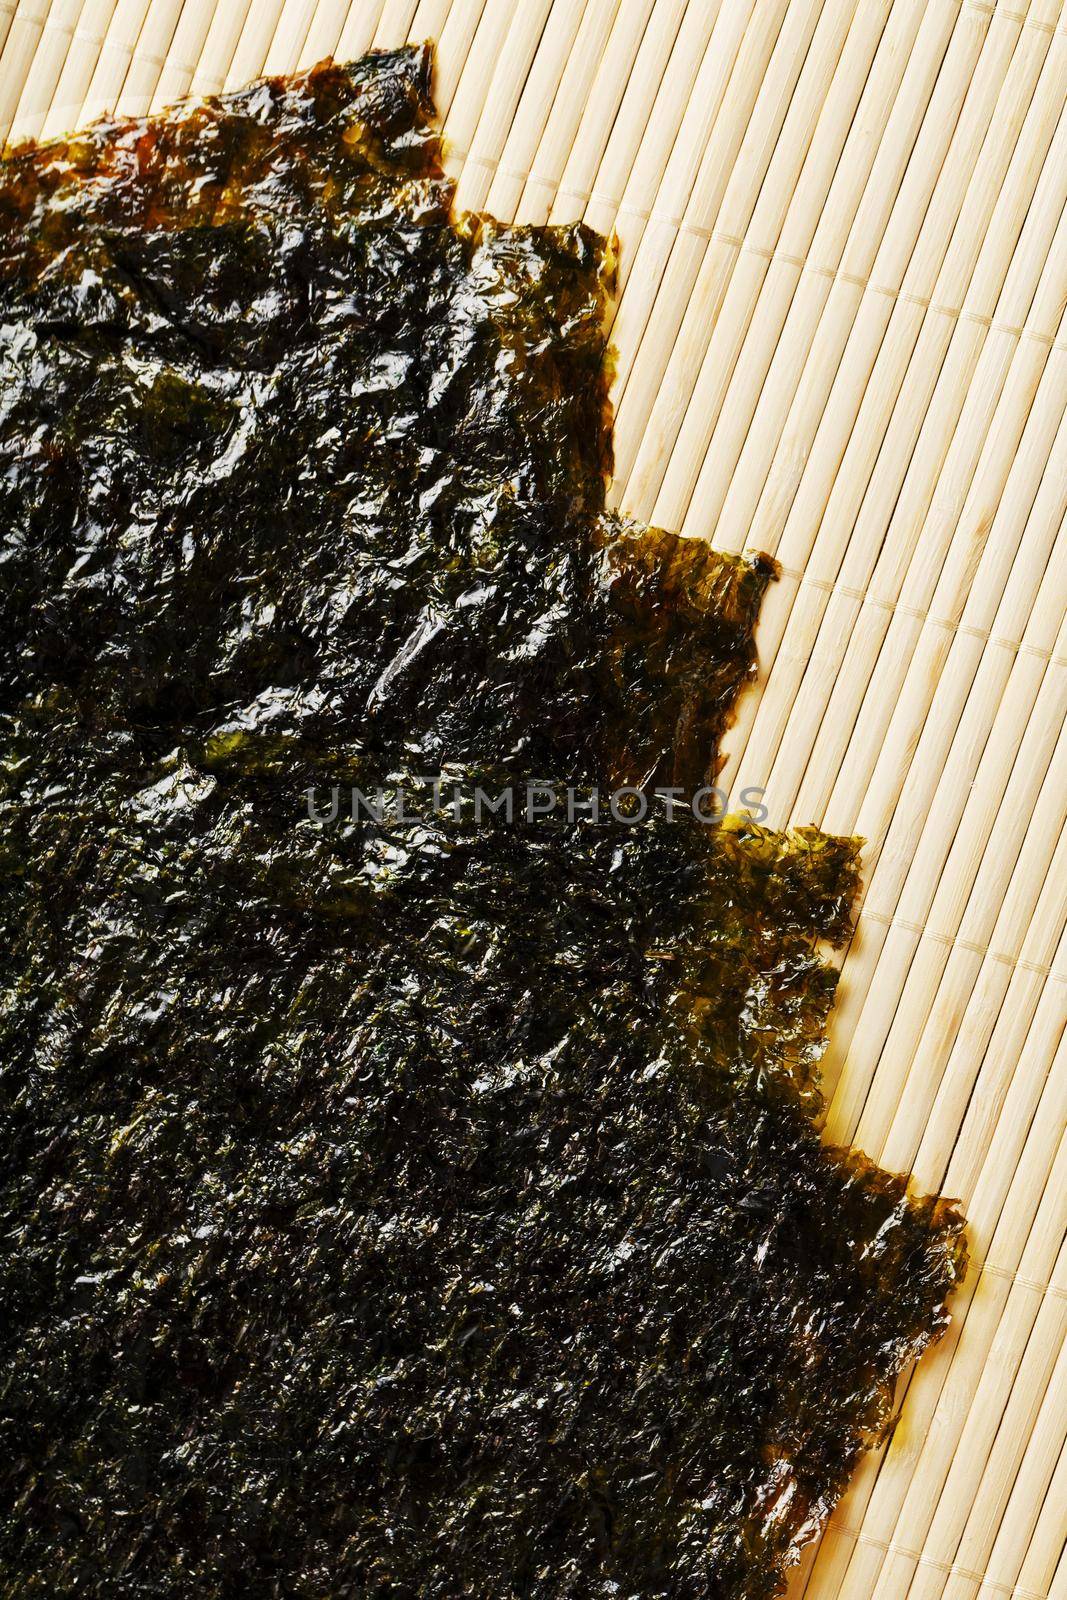 Nori algae leaves on a bamboo substrate. The main ingredient for sushi rolls. Top view